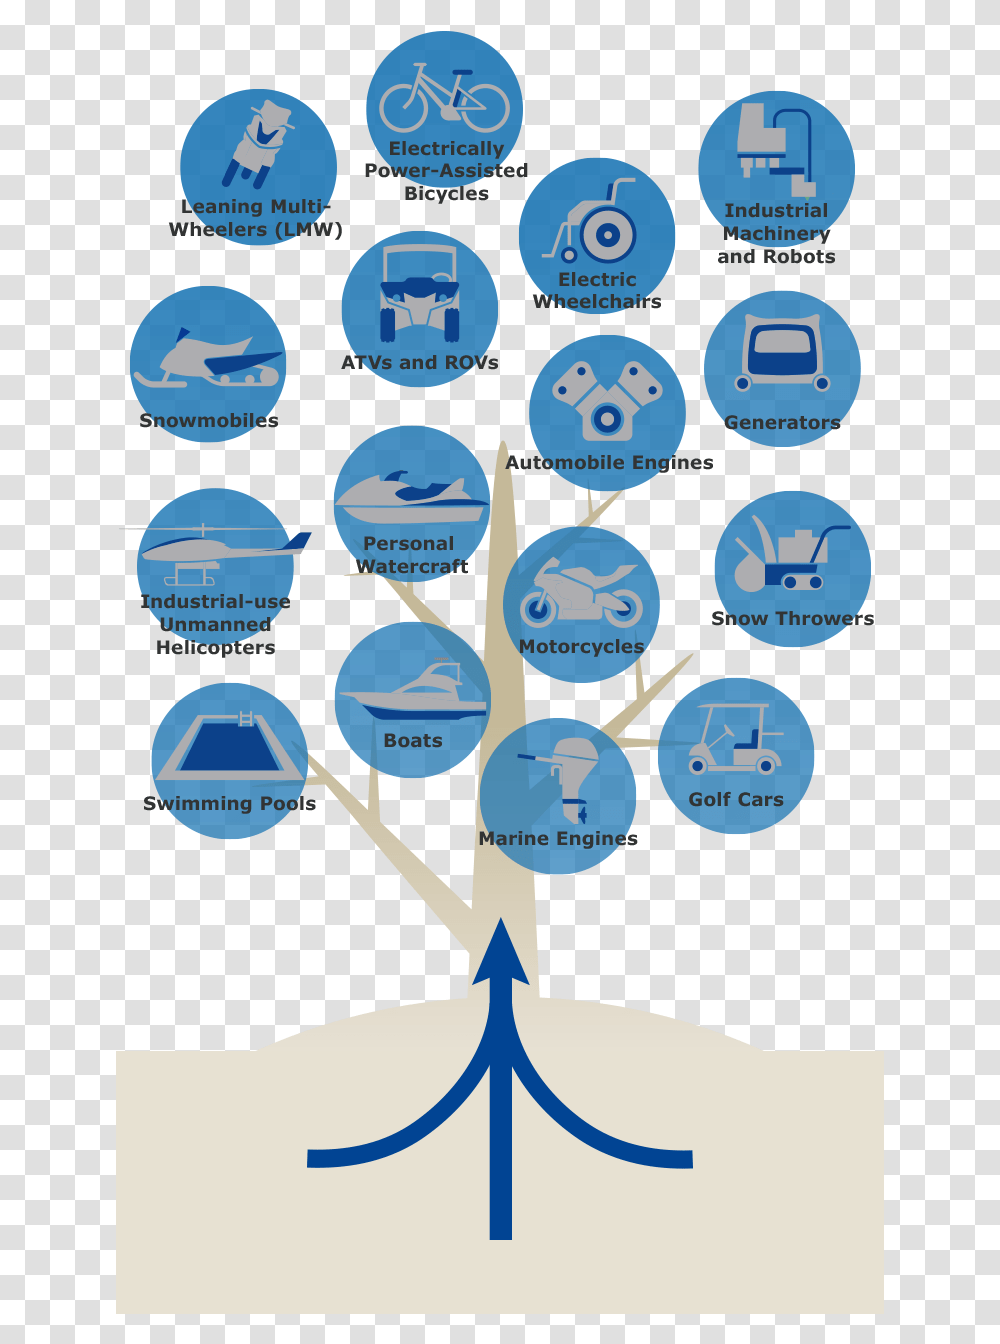 Electrical Motor Types Tree, Plot, Network, Diagram Transparent Png